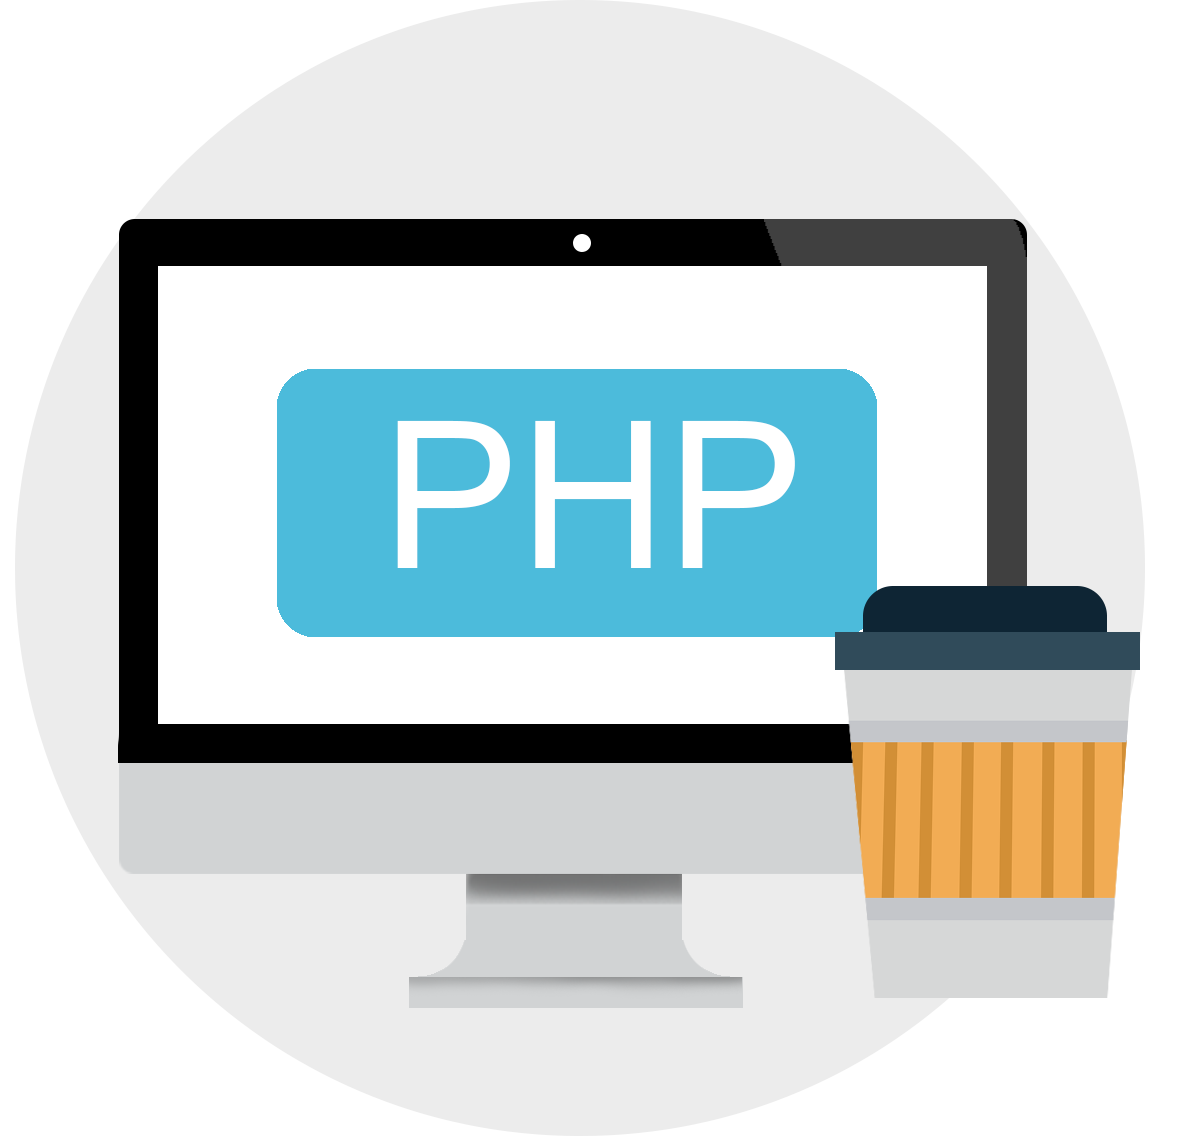 Www easy. Php разработка. Php Разработчик. Веб-Разработчик php. Php веб разработка.